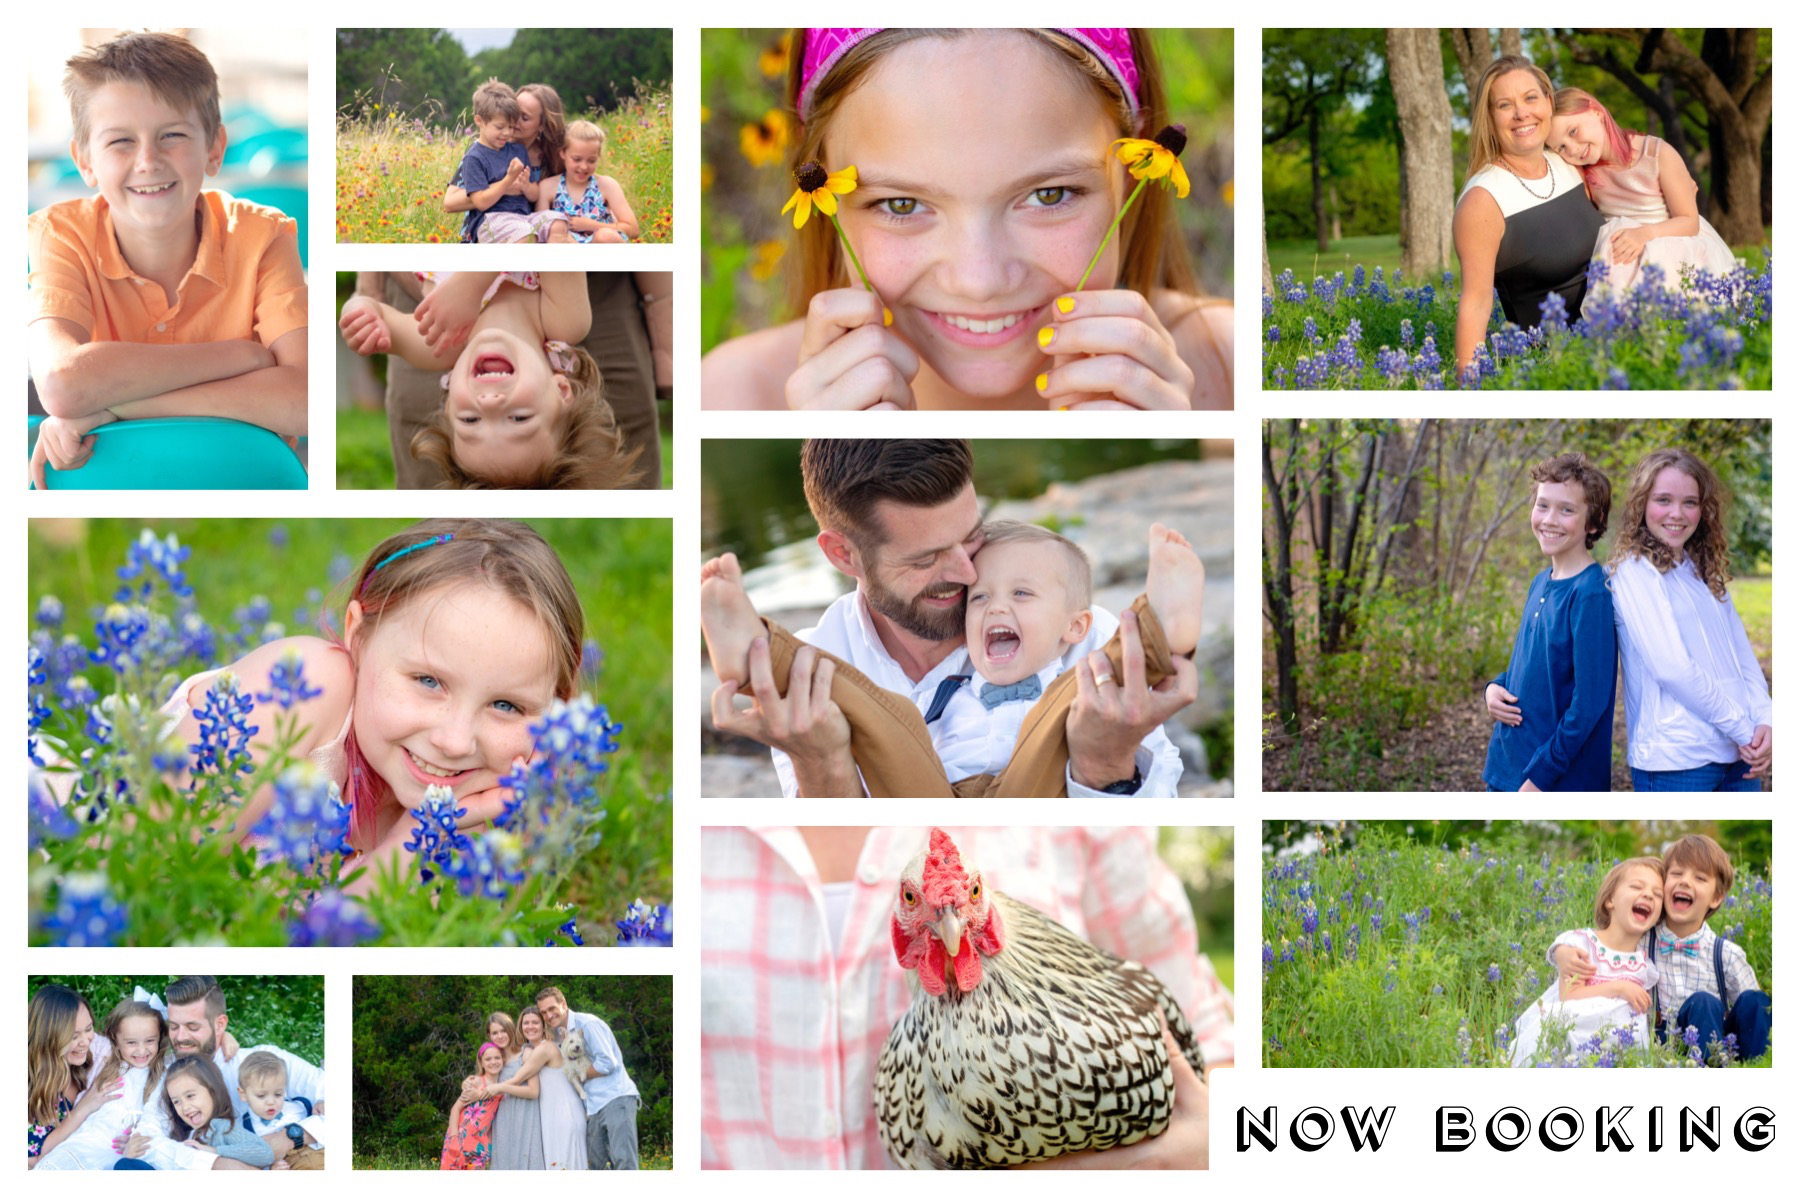 Now Booking – Spring Photo Sessions